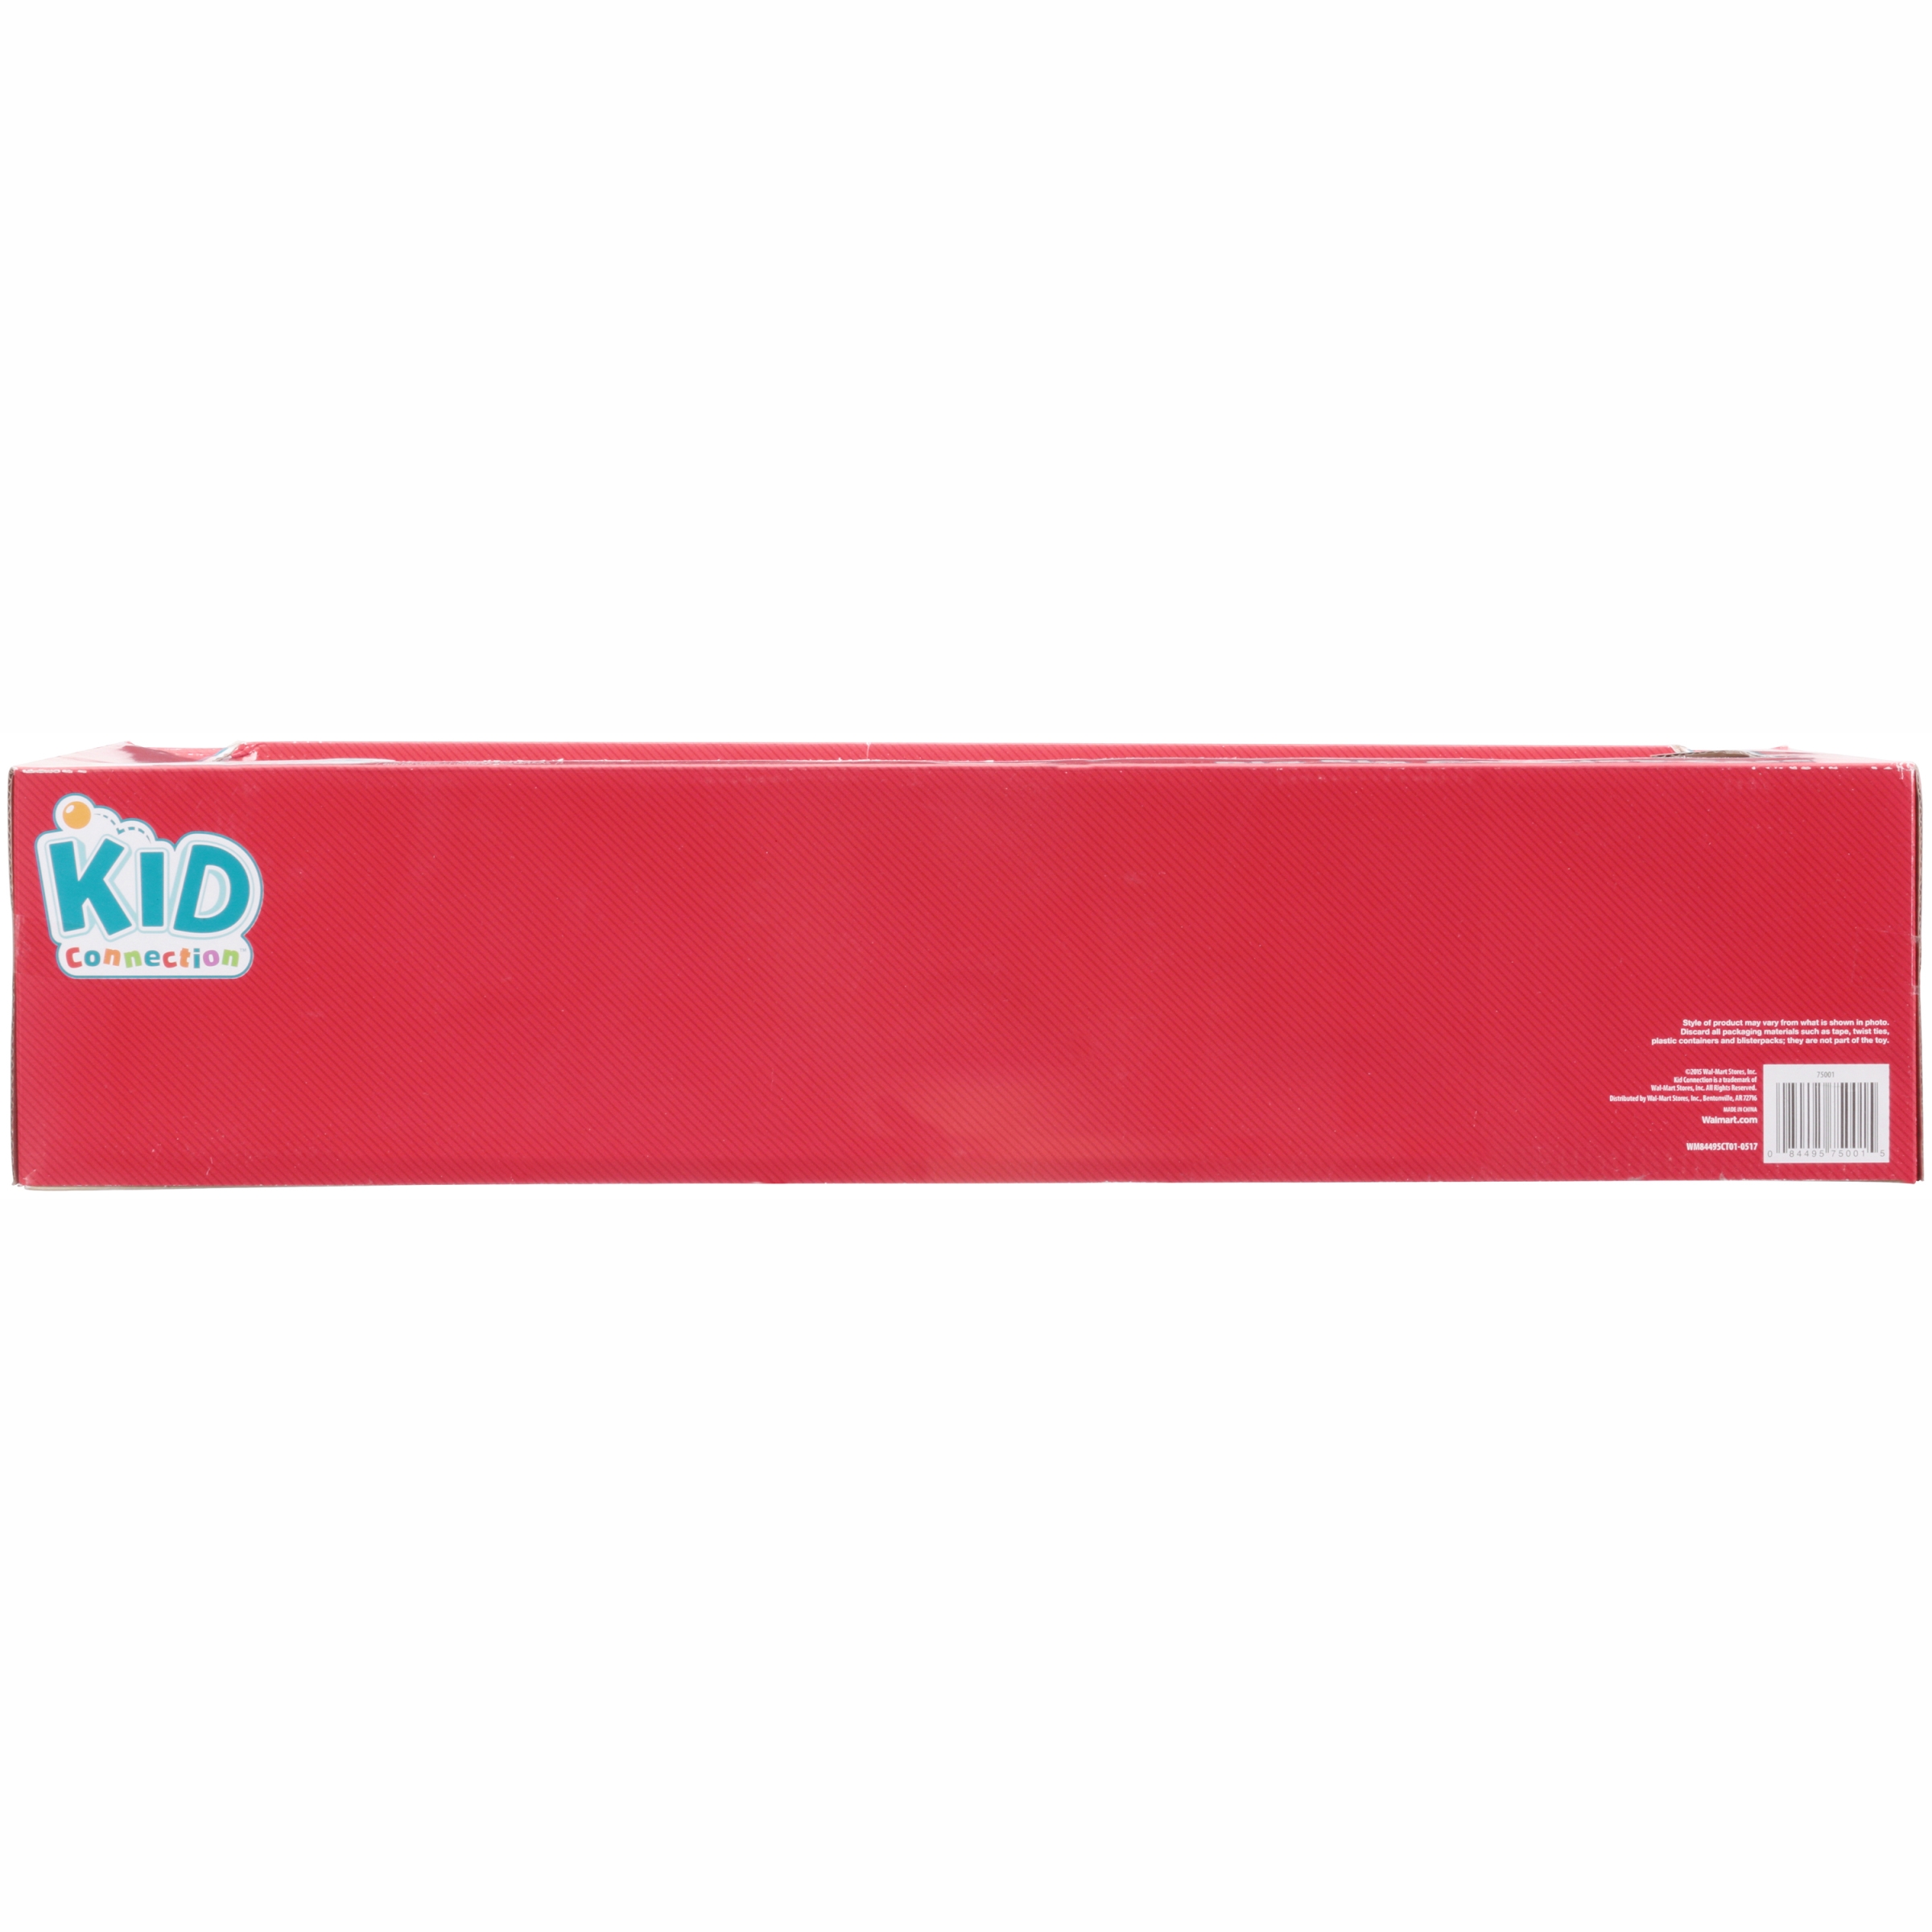 Kid Connection™ Big Rig Carrying Case 22 pc Box - image 4 of 4